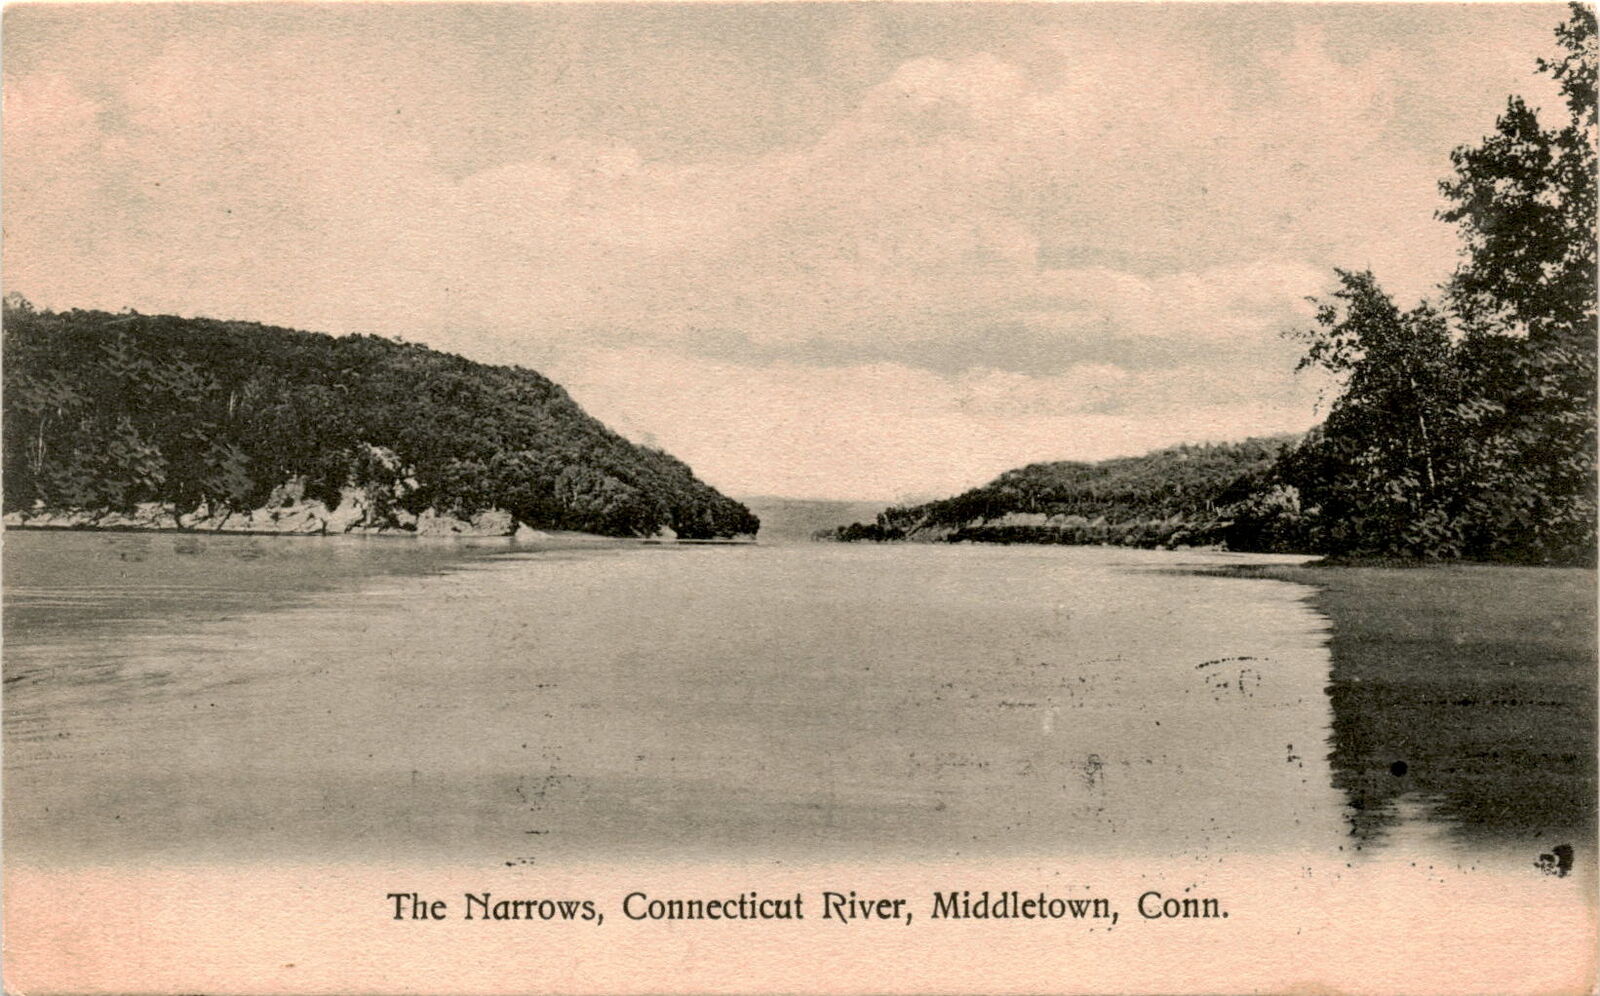 Narrows, Connecticut River, Middletown, Middlesex County. Postcard